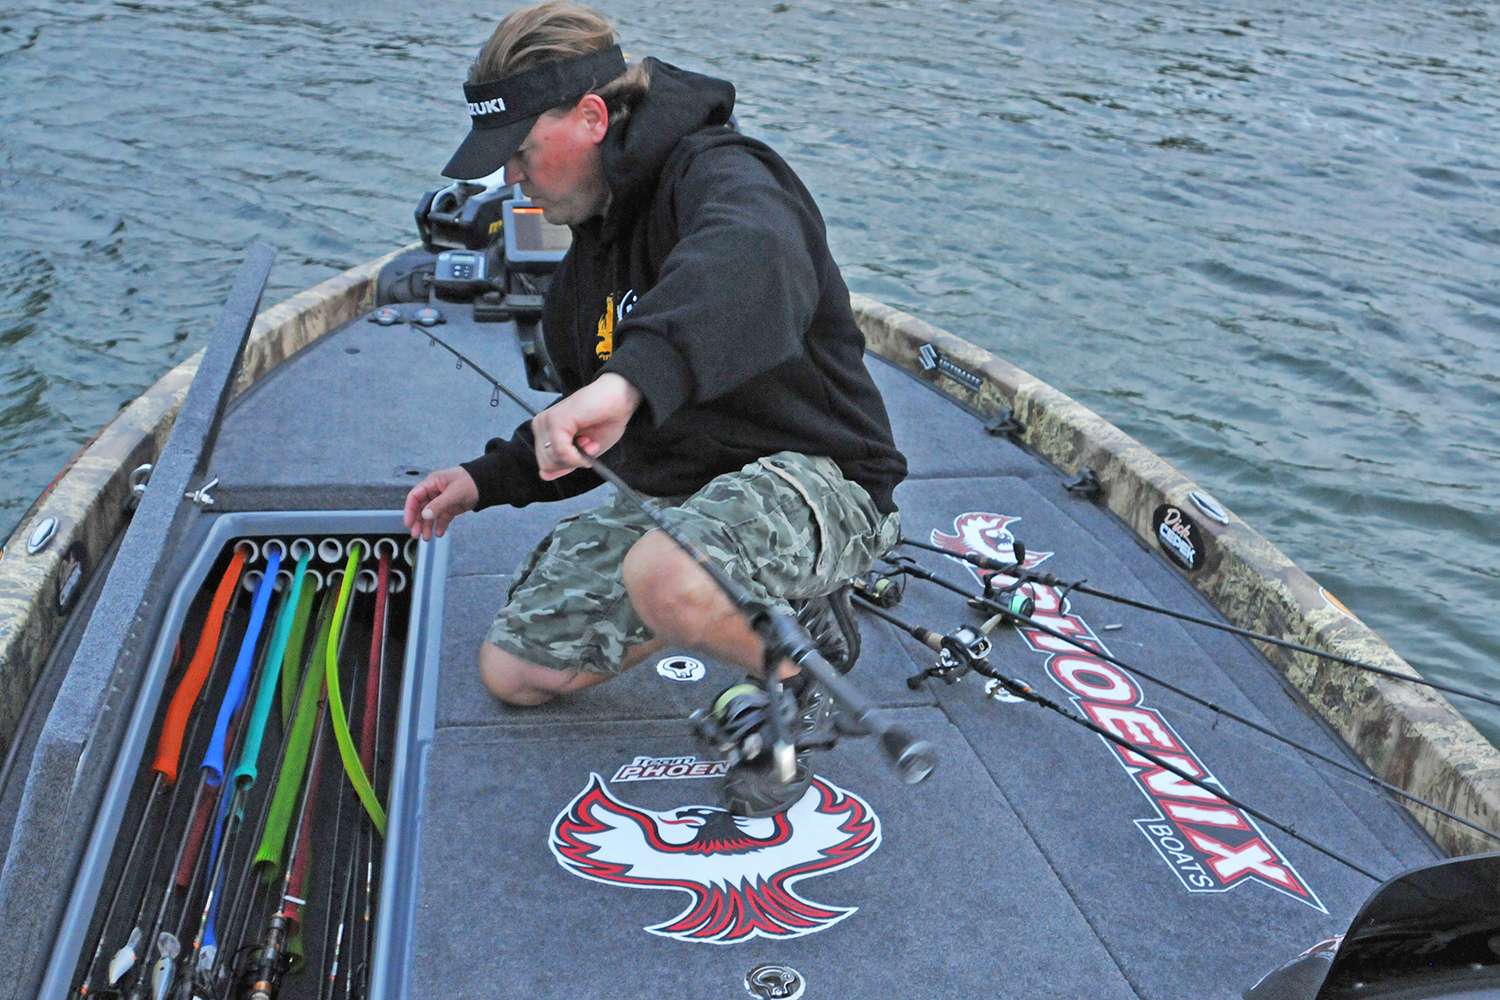 Pirch retrieves a quiver of spinning rods for the day's hunt for bass on the St. Lawrence.